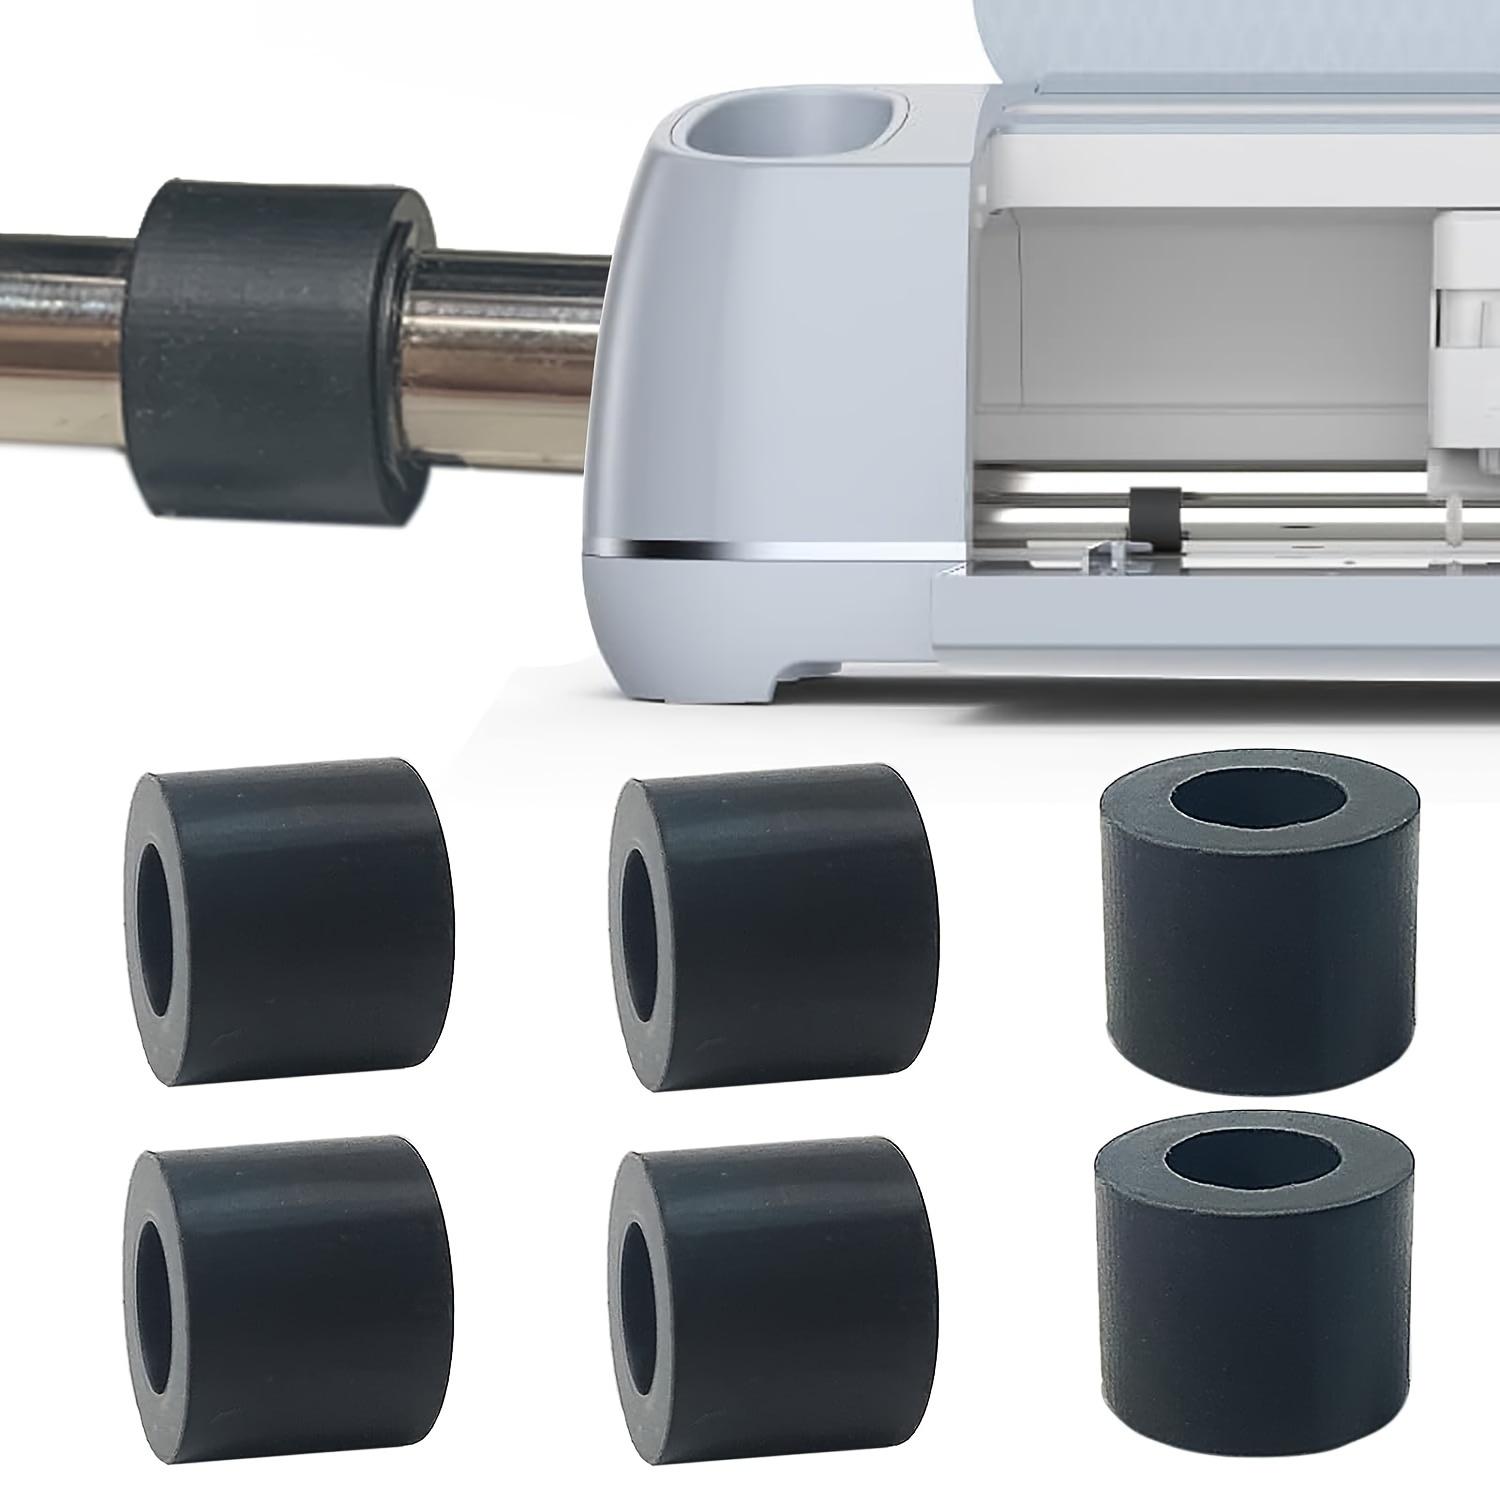 

Cutter Rubber Roller, Special Replacement Accessories Compatible With Cricut Maker 2/3 Cricut Joy Cricut Explore Air 2 Cricut Explore 3 And All Other Cricut Model Rubber Wheel Pads